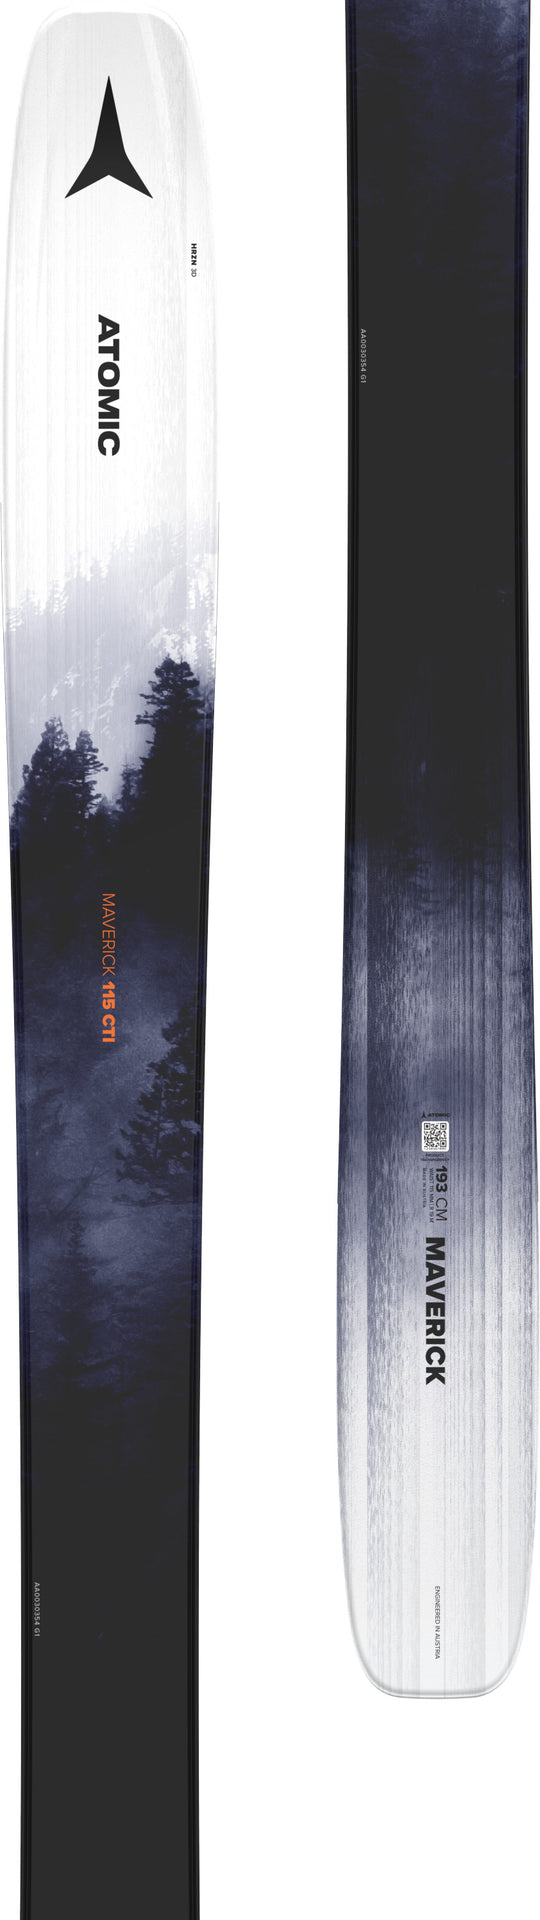 All Skis – Atomic New Zealand